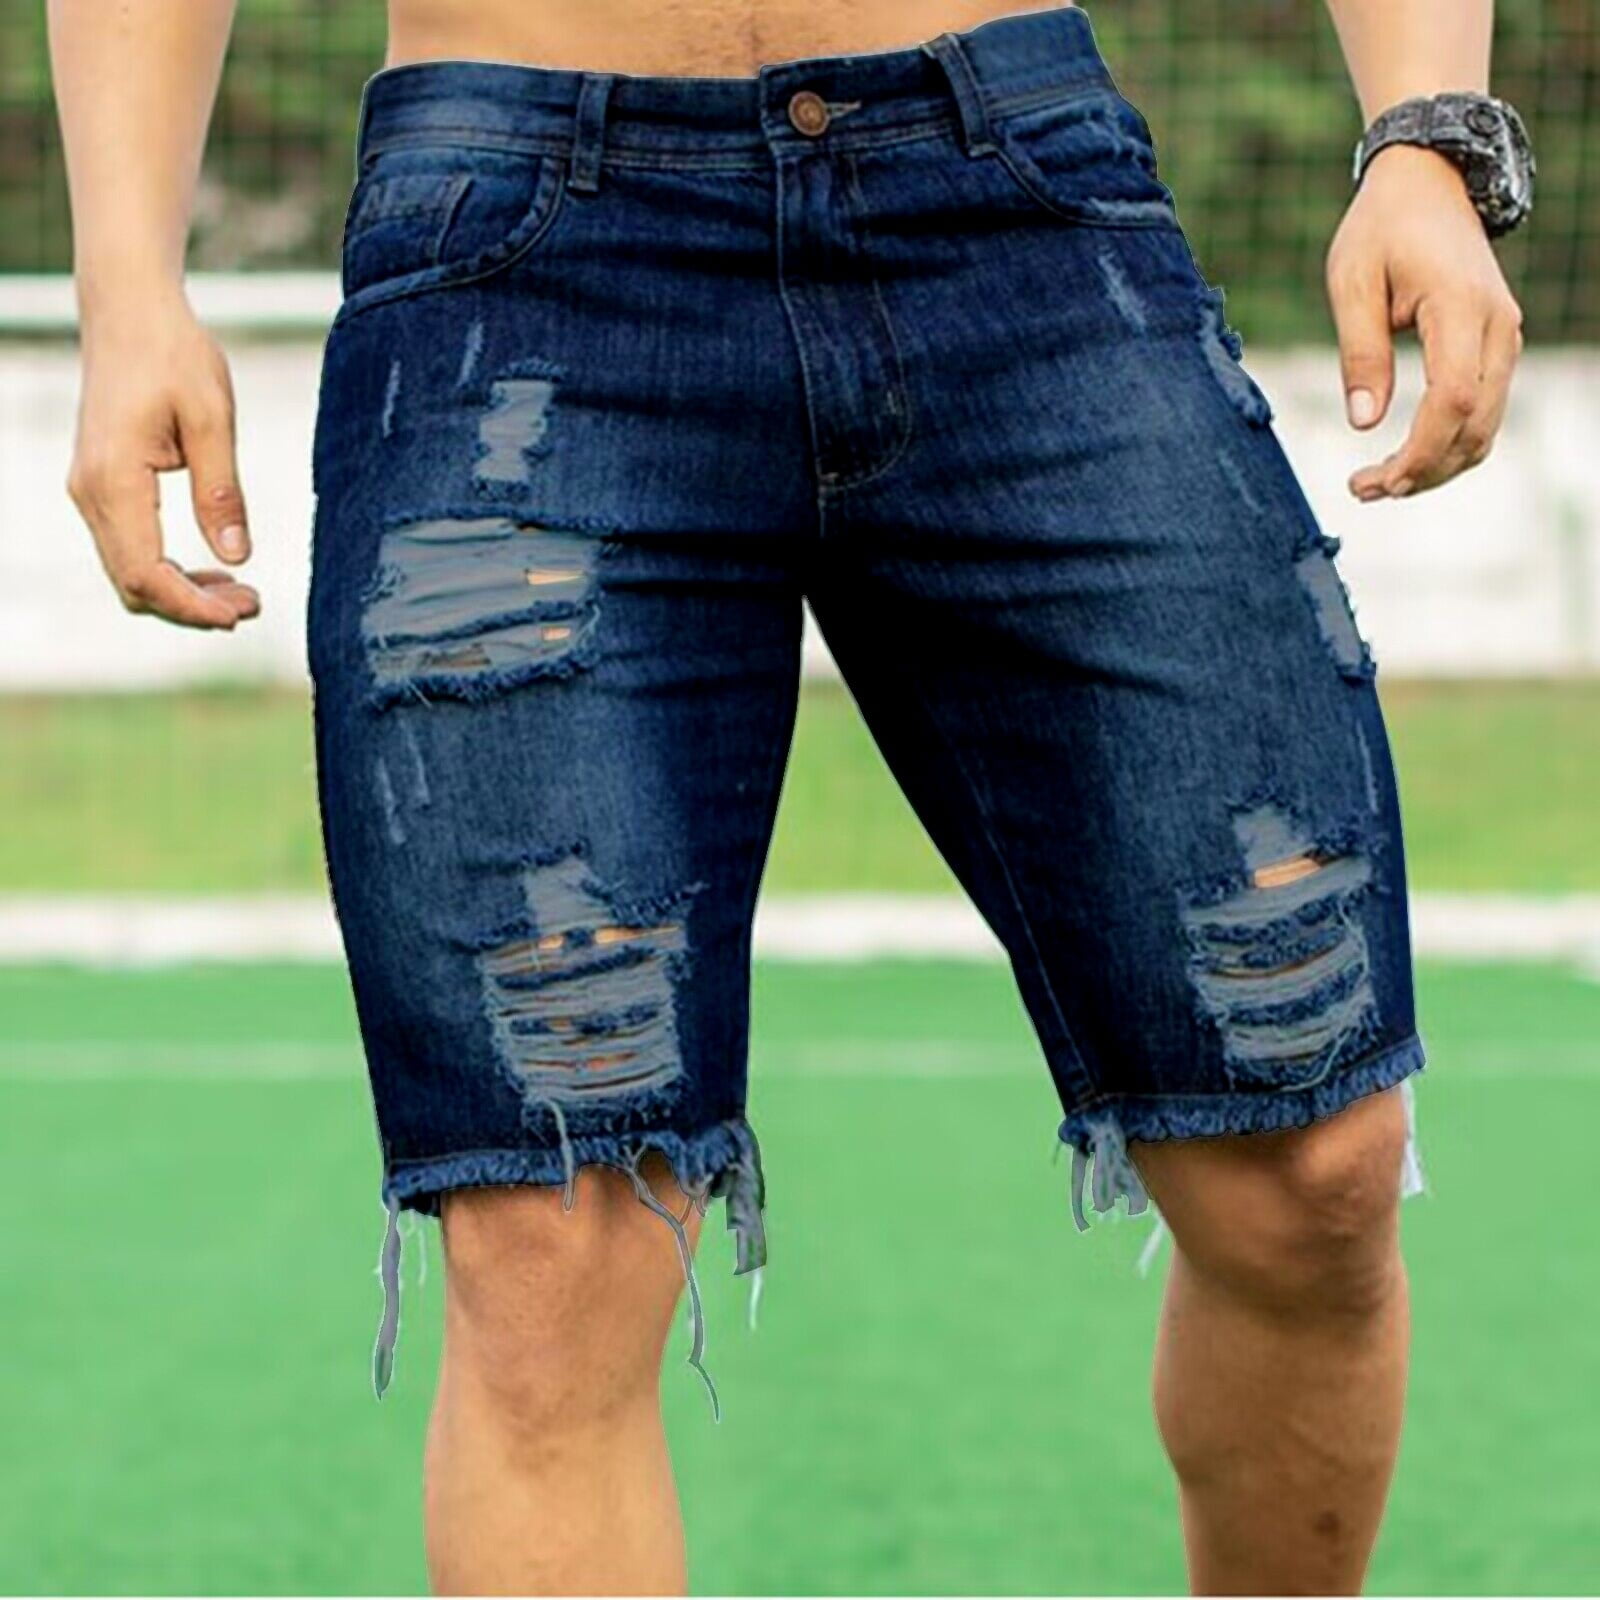 HIMIWAY Men's Jeans Shorts Ripped Distressed Denim Shorts With Broken Hole  Distressed Stretchy Jeans RippedLight shorts Fashion shorts Dark Blue XXL 